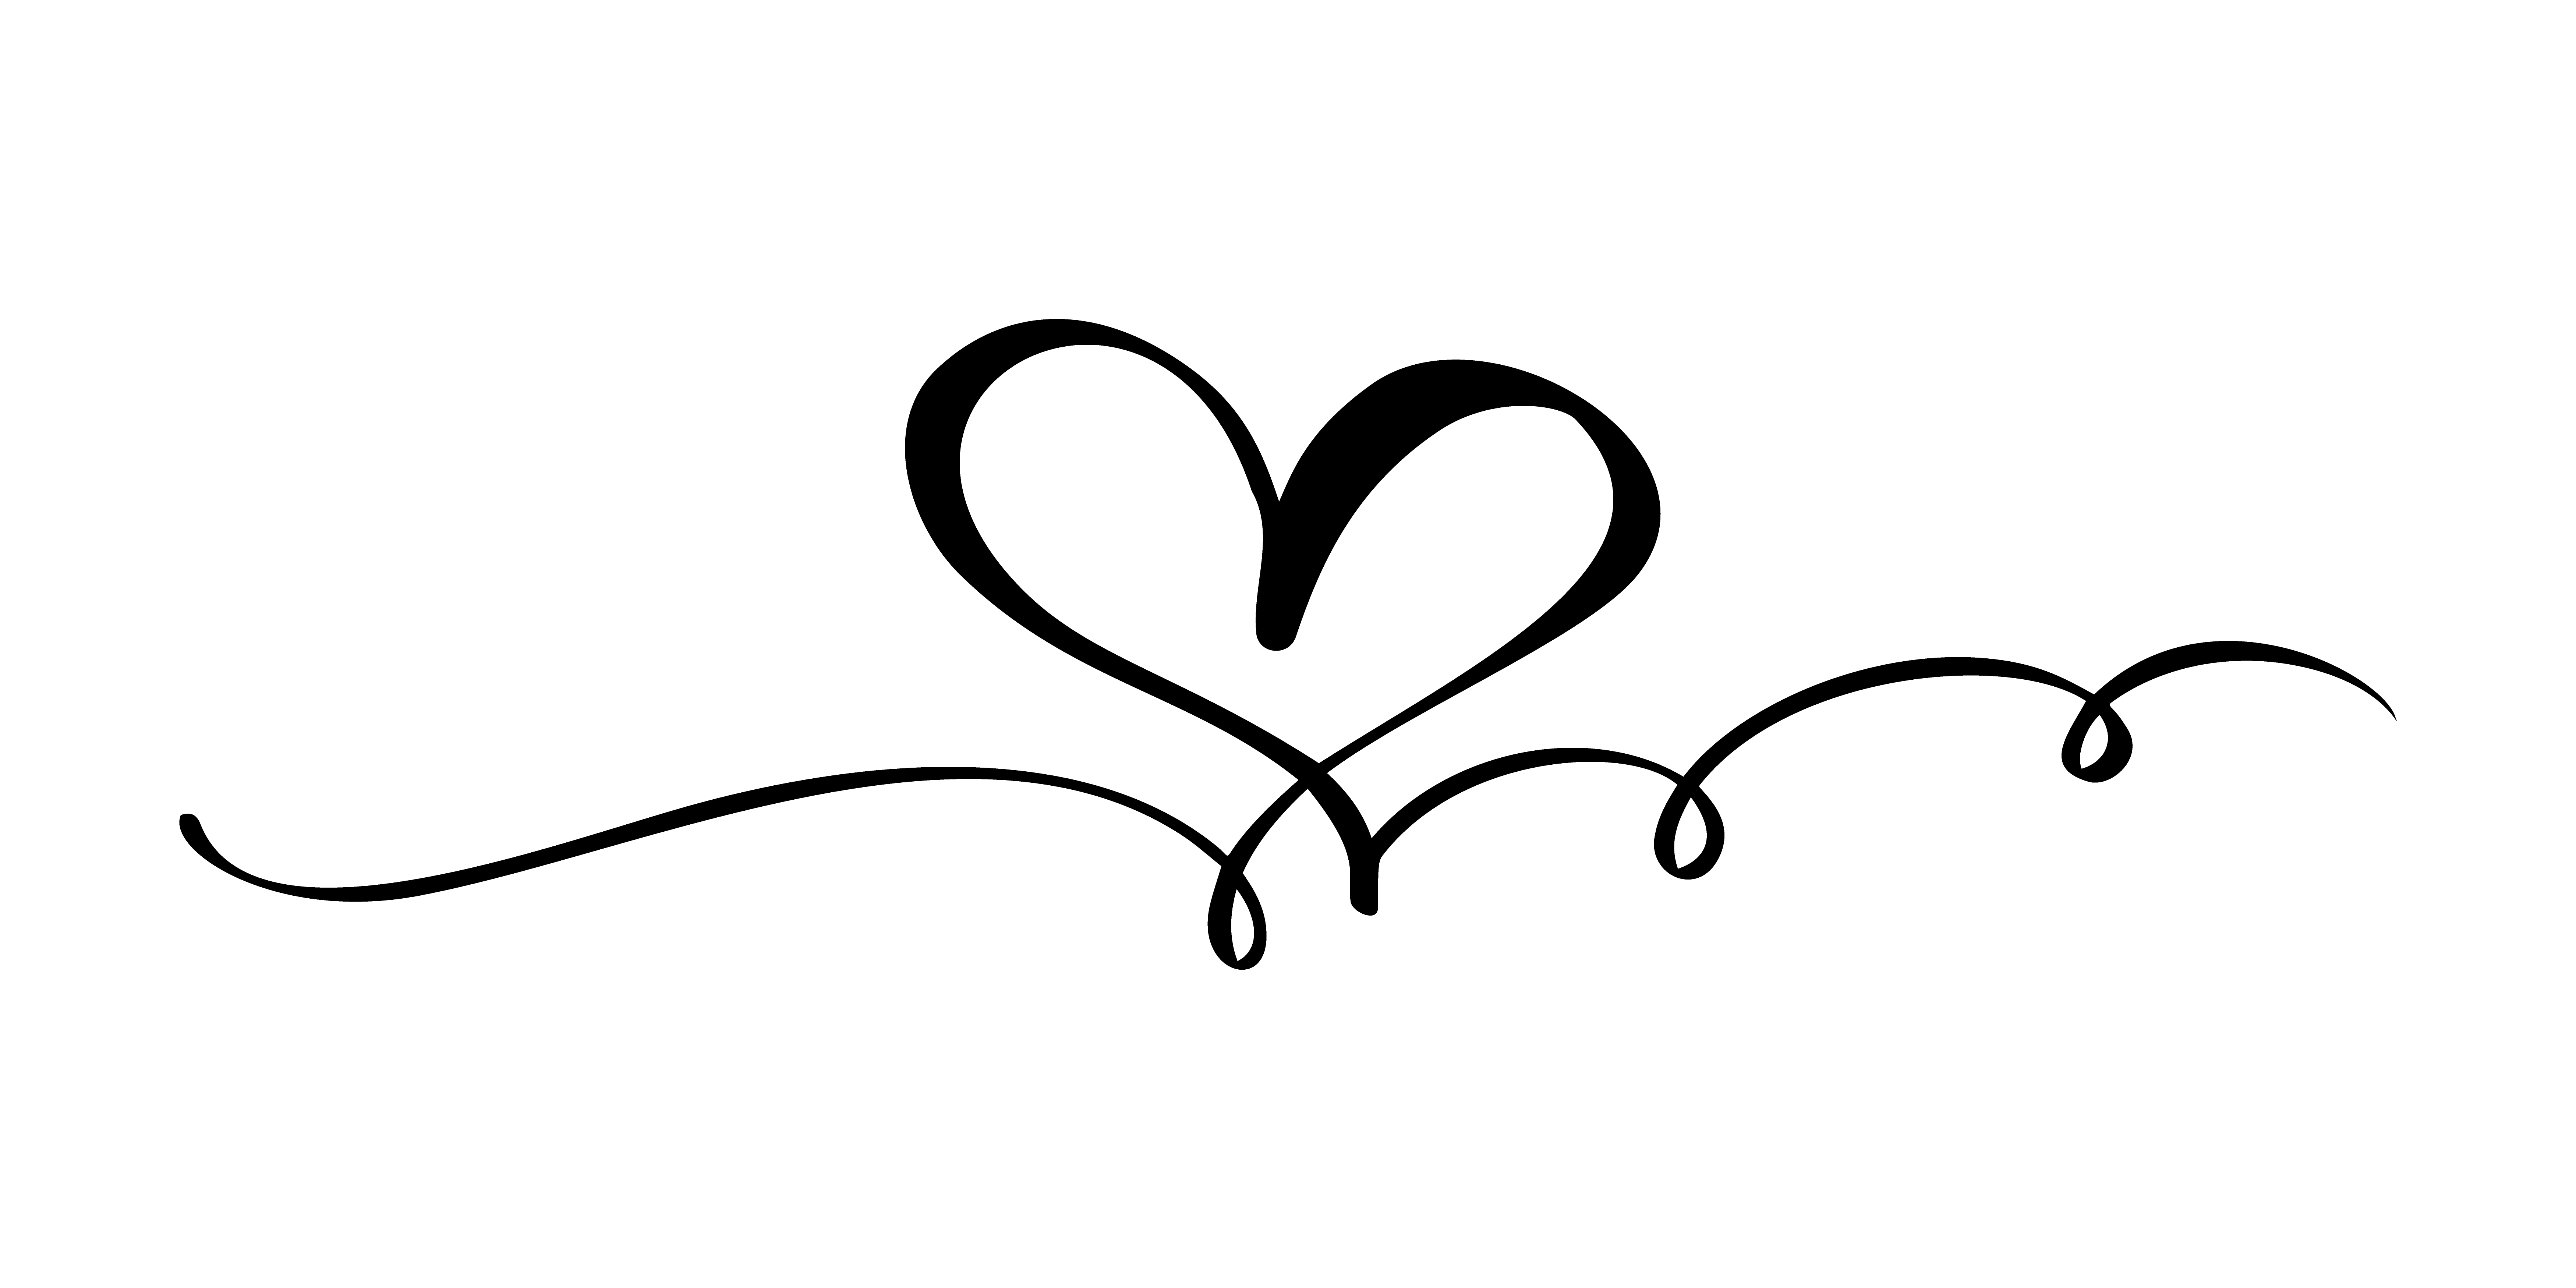 Download Hand drawn Heart love sign. Romantic calligraphy vector illustration. Concepn icon symbol for t ...